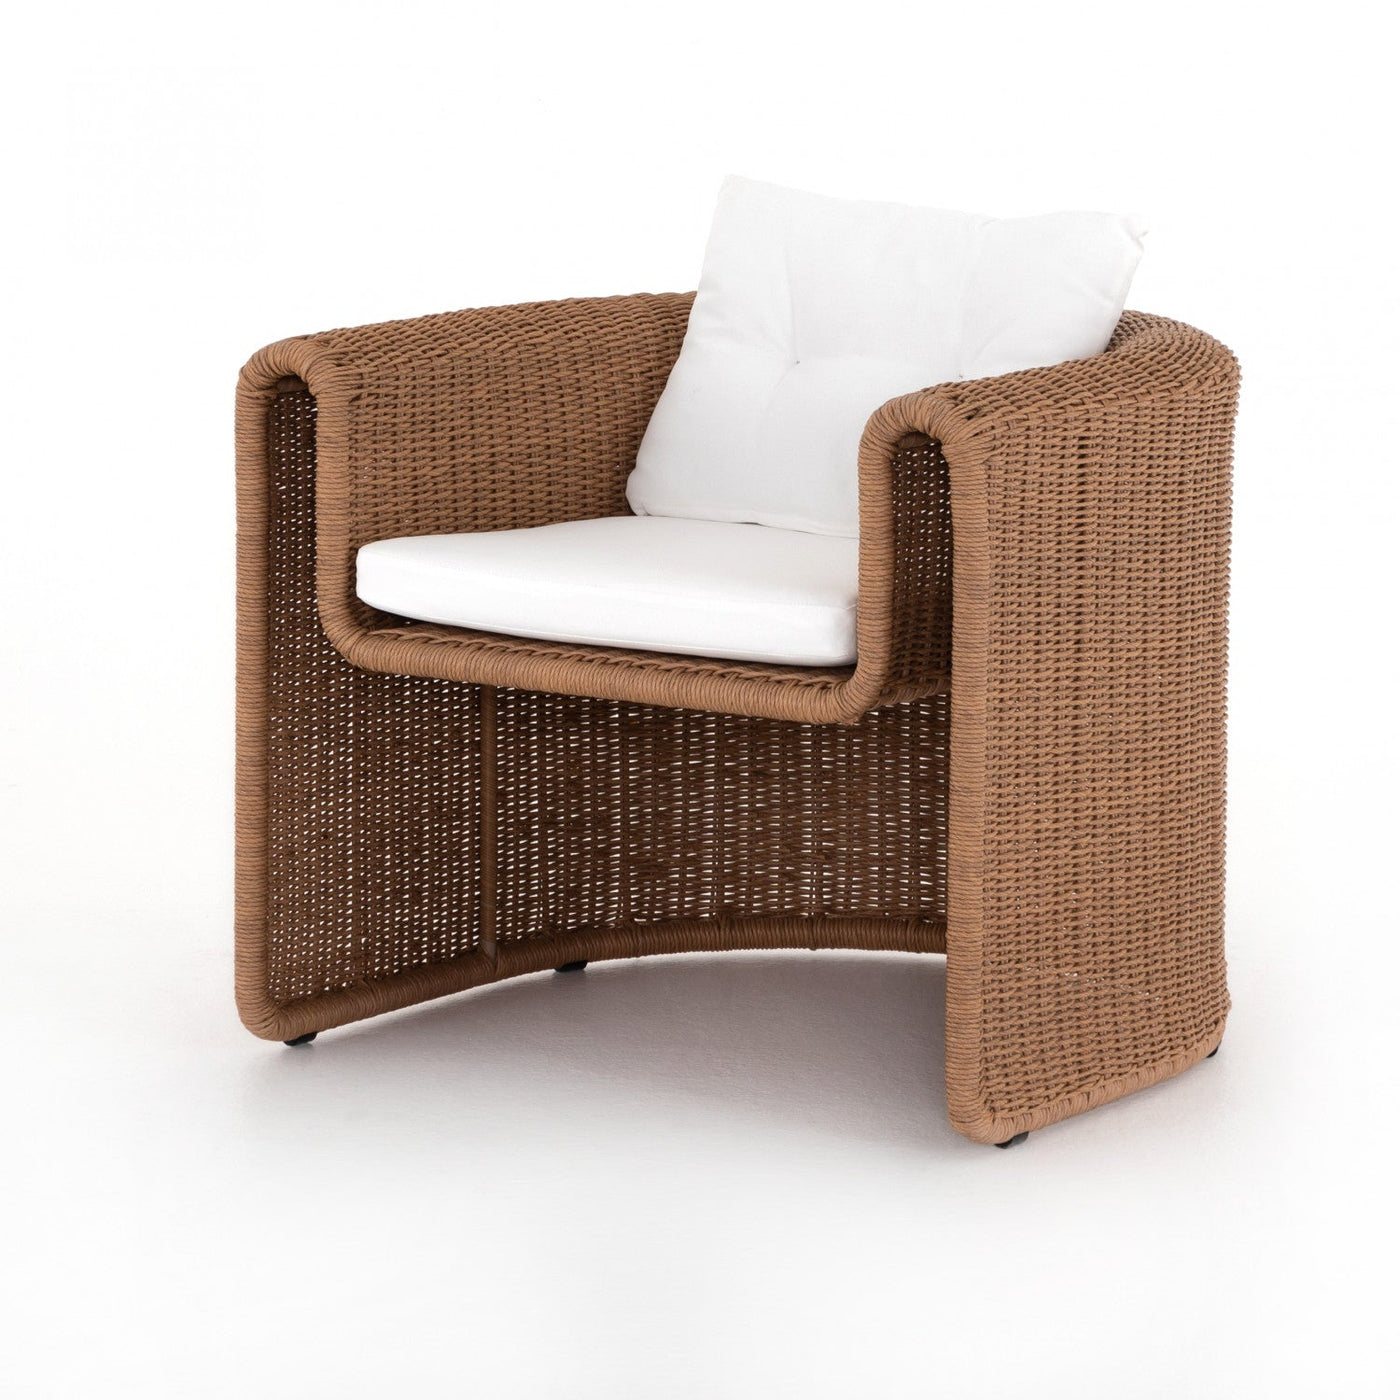 TUCSON WOVEN OUTDOOR CHAIR